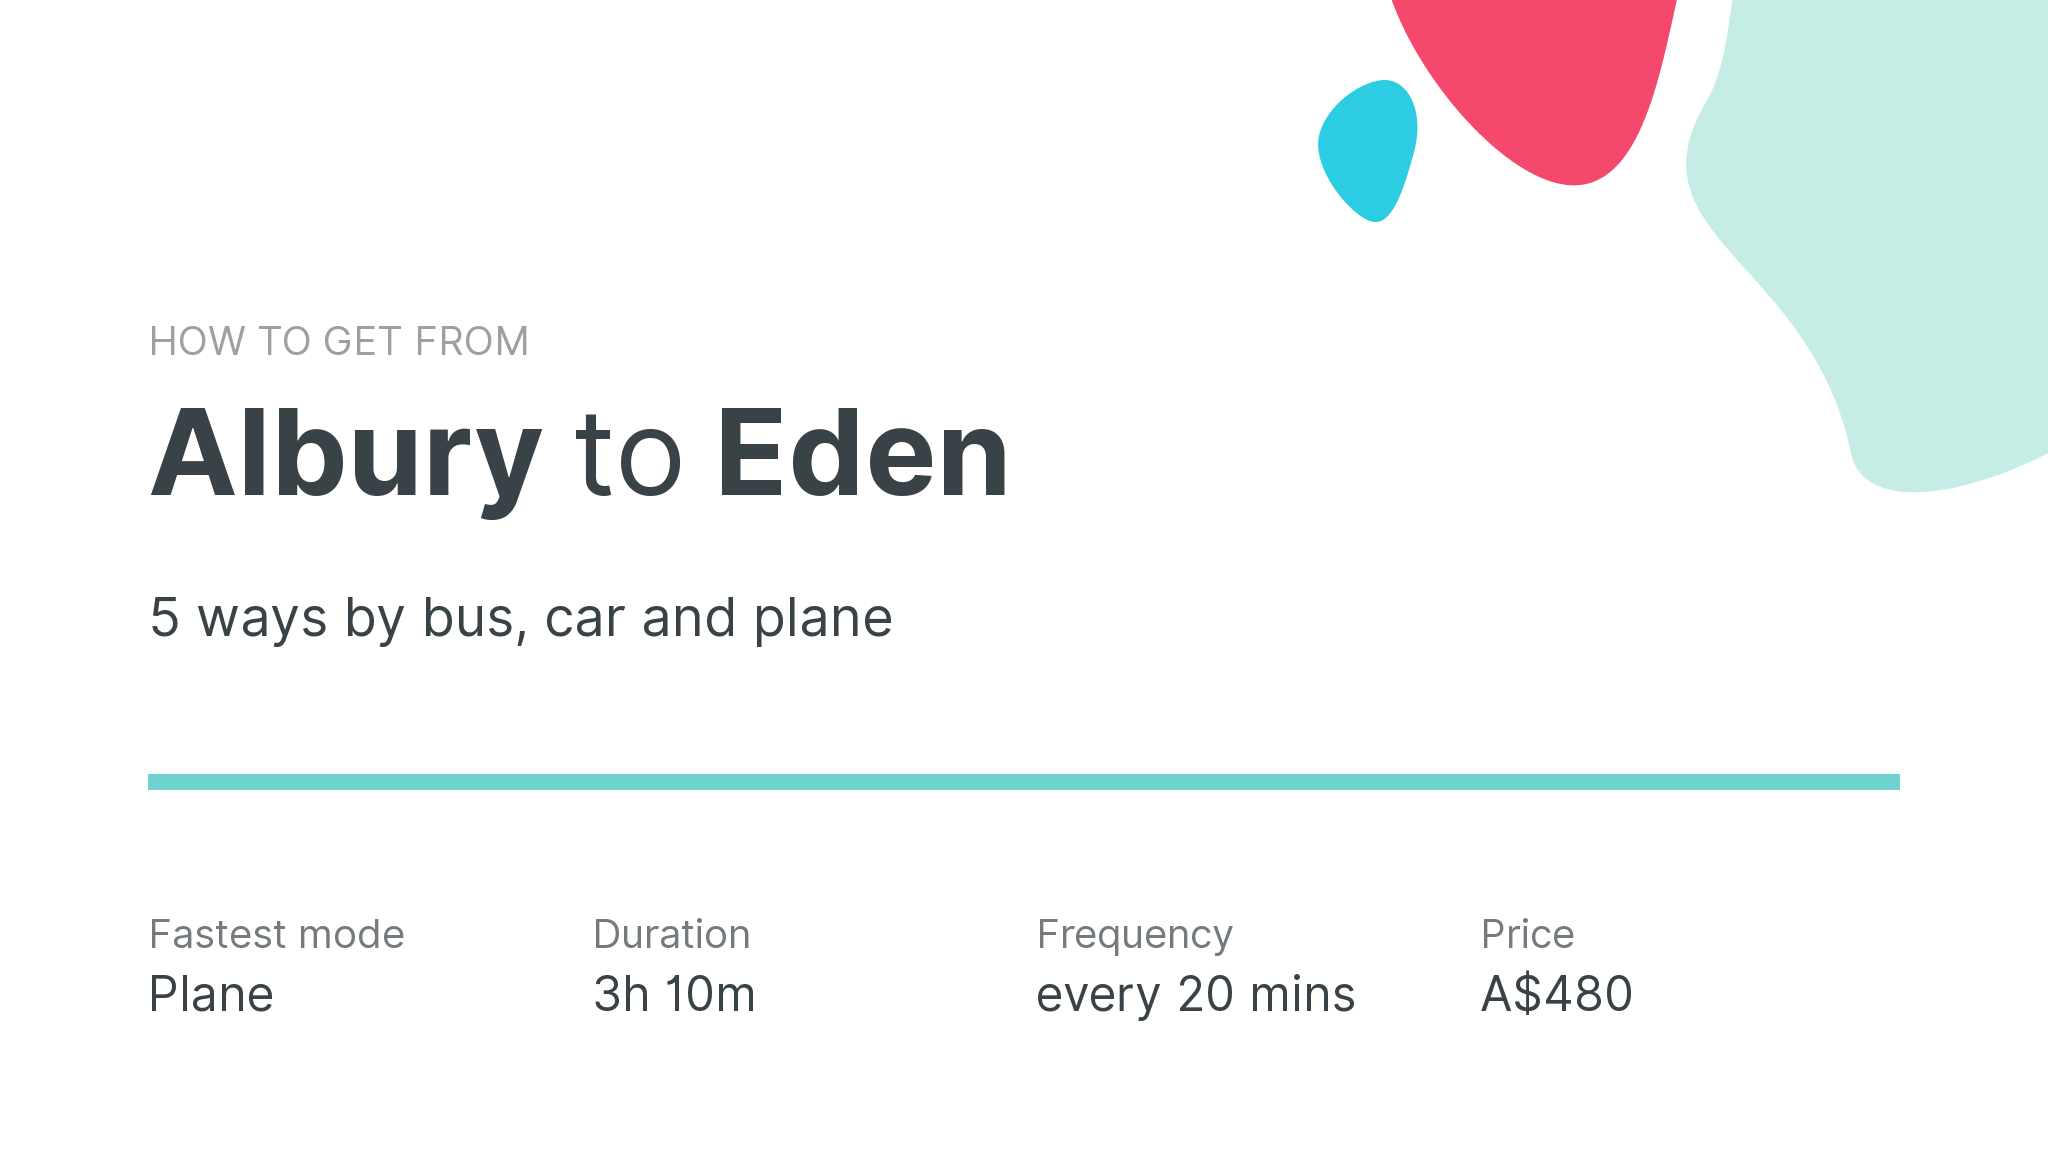 How do I get from Albury to Eden